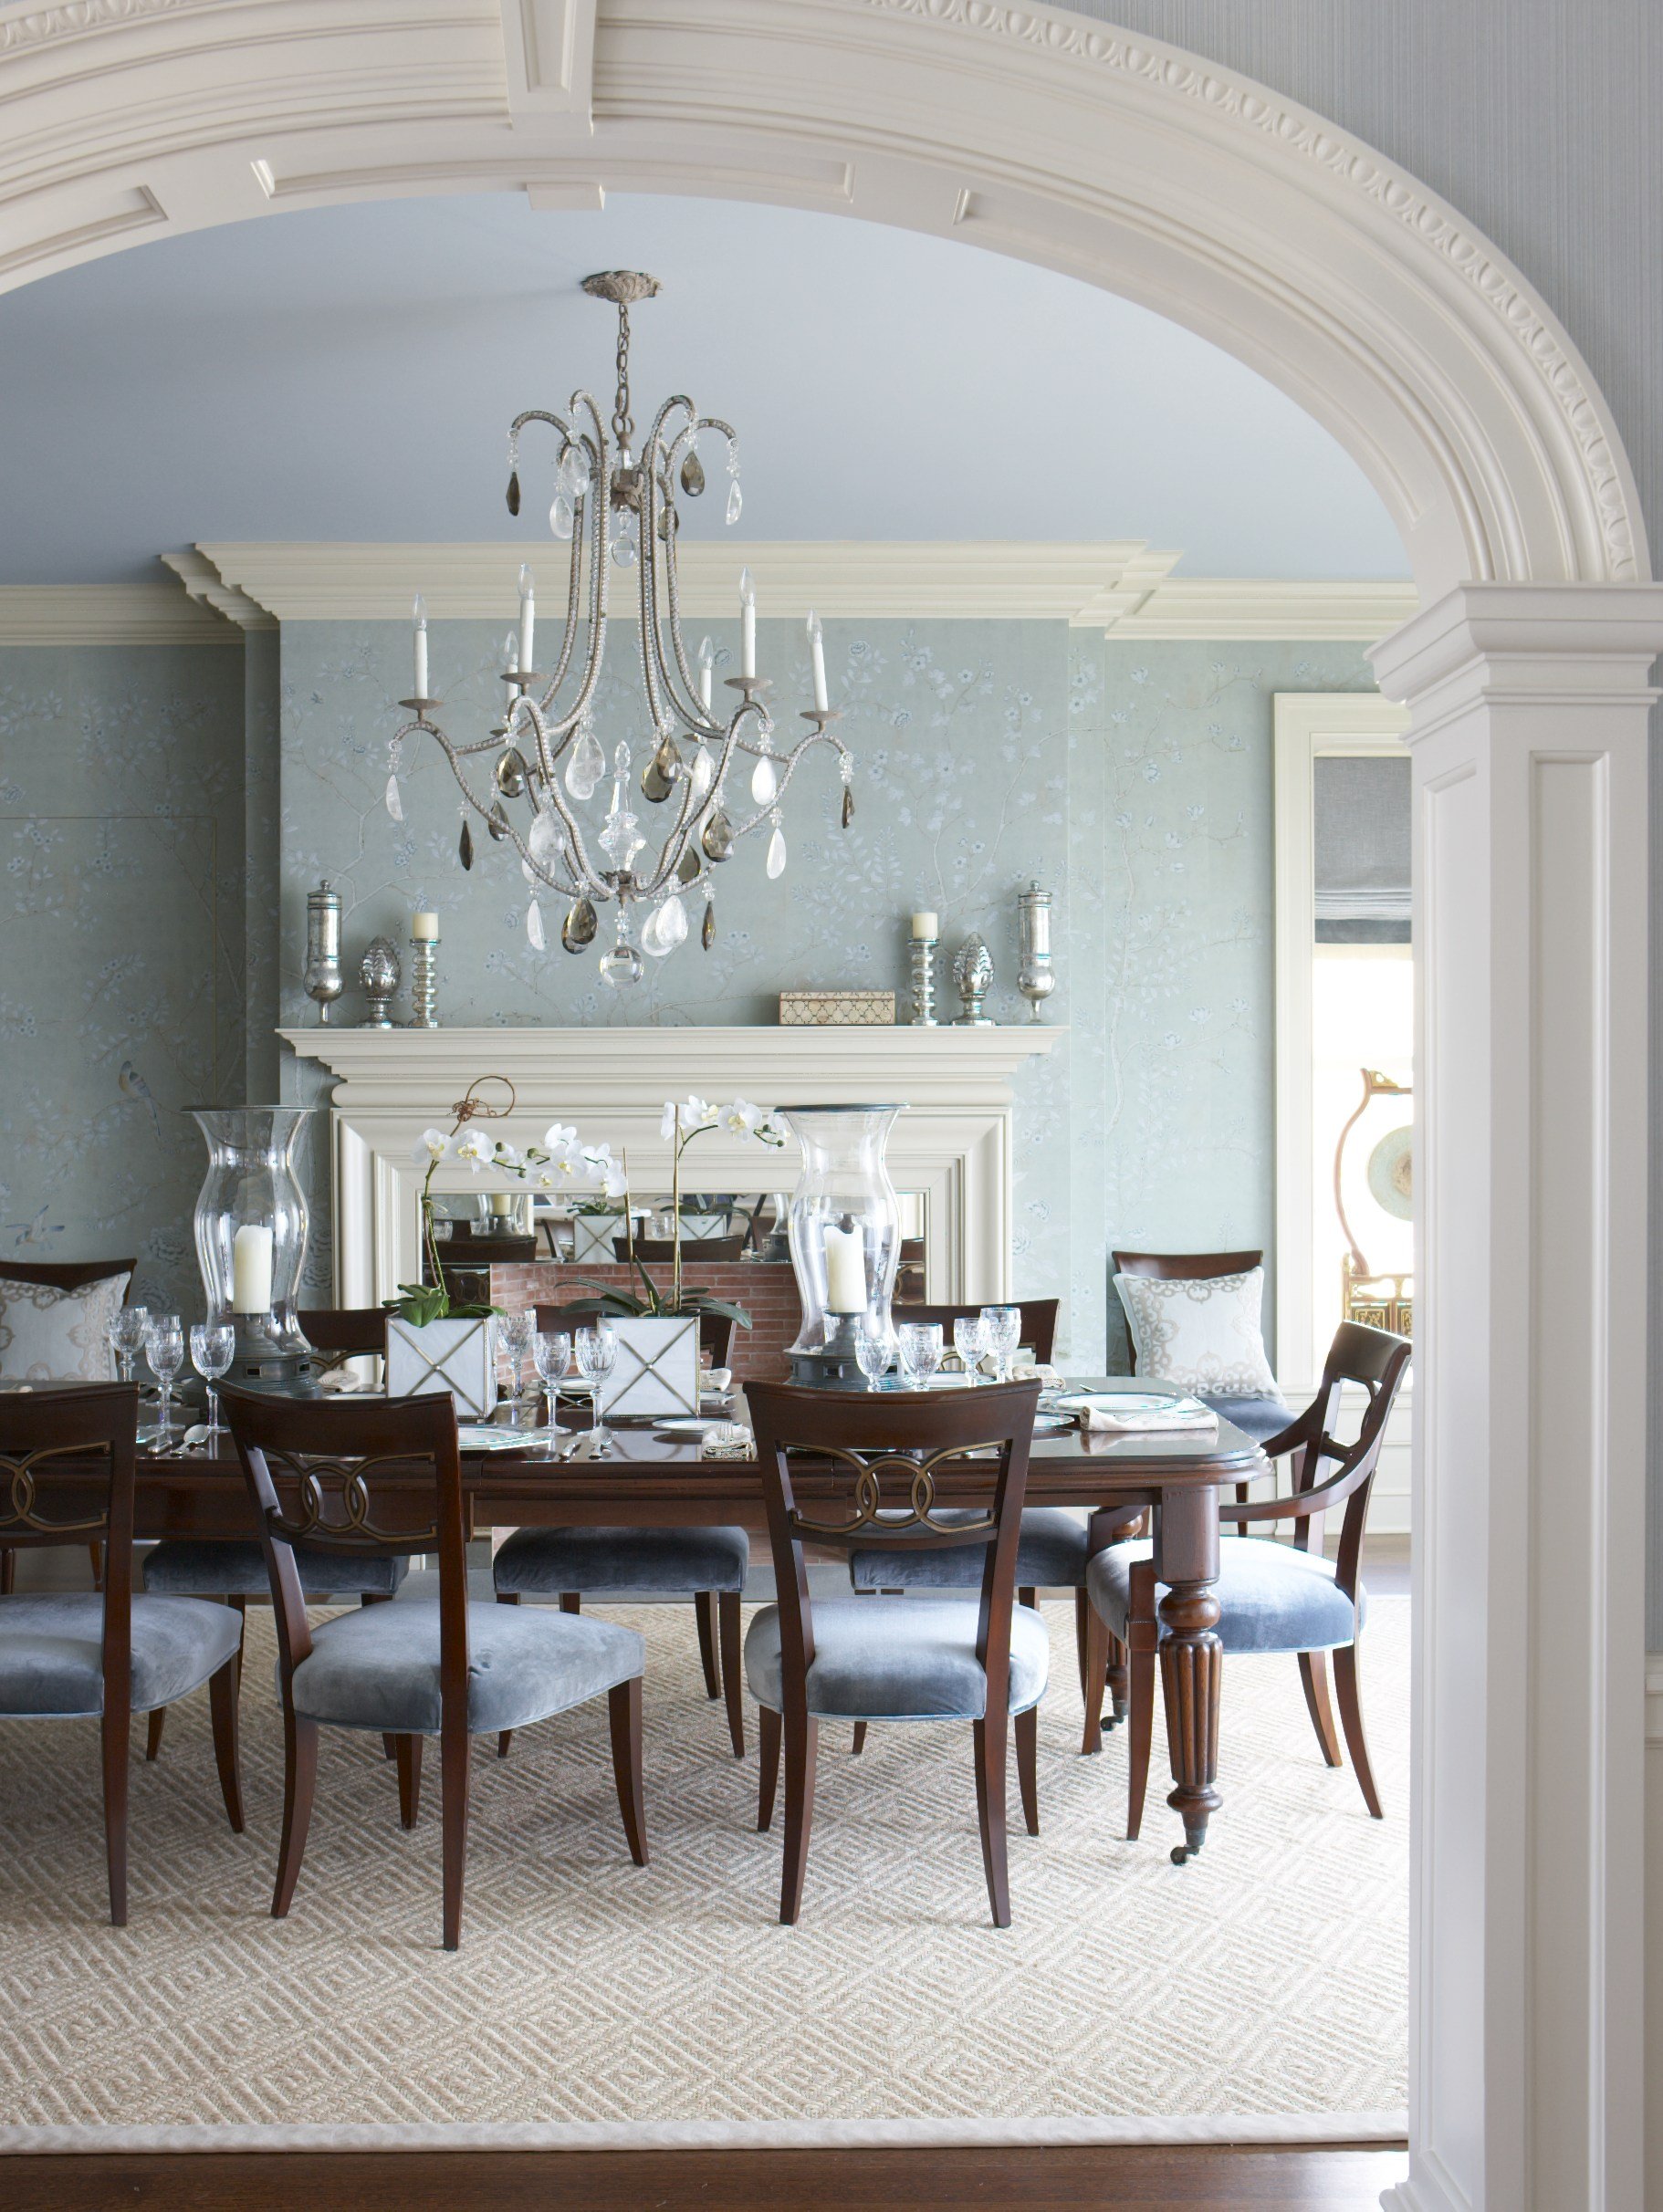 5-dining-room-chandelier-blue-wallpaper-classic-elegant-transitional-colonial-greenwich-connecticut.jpg